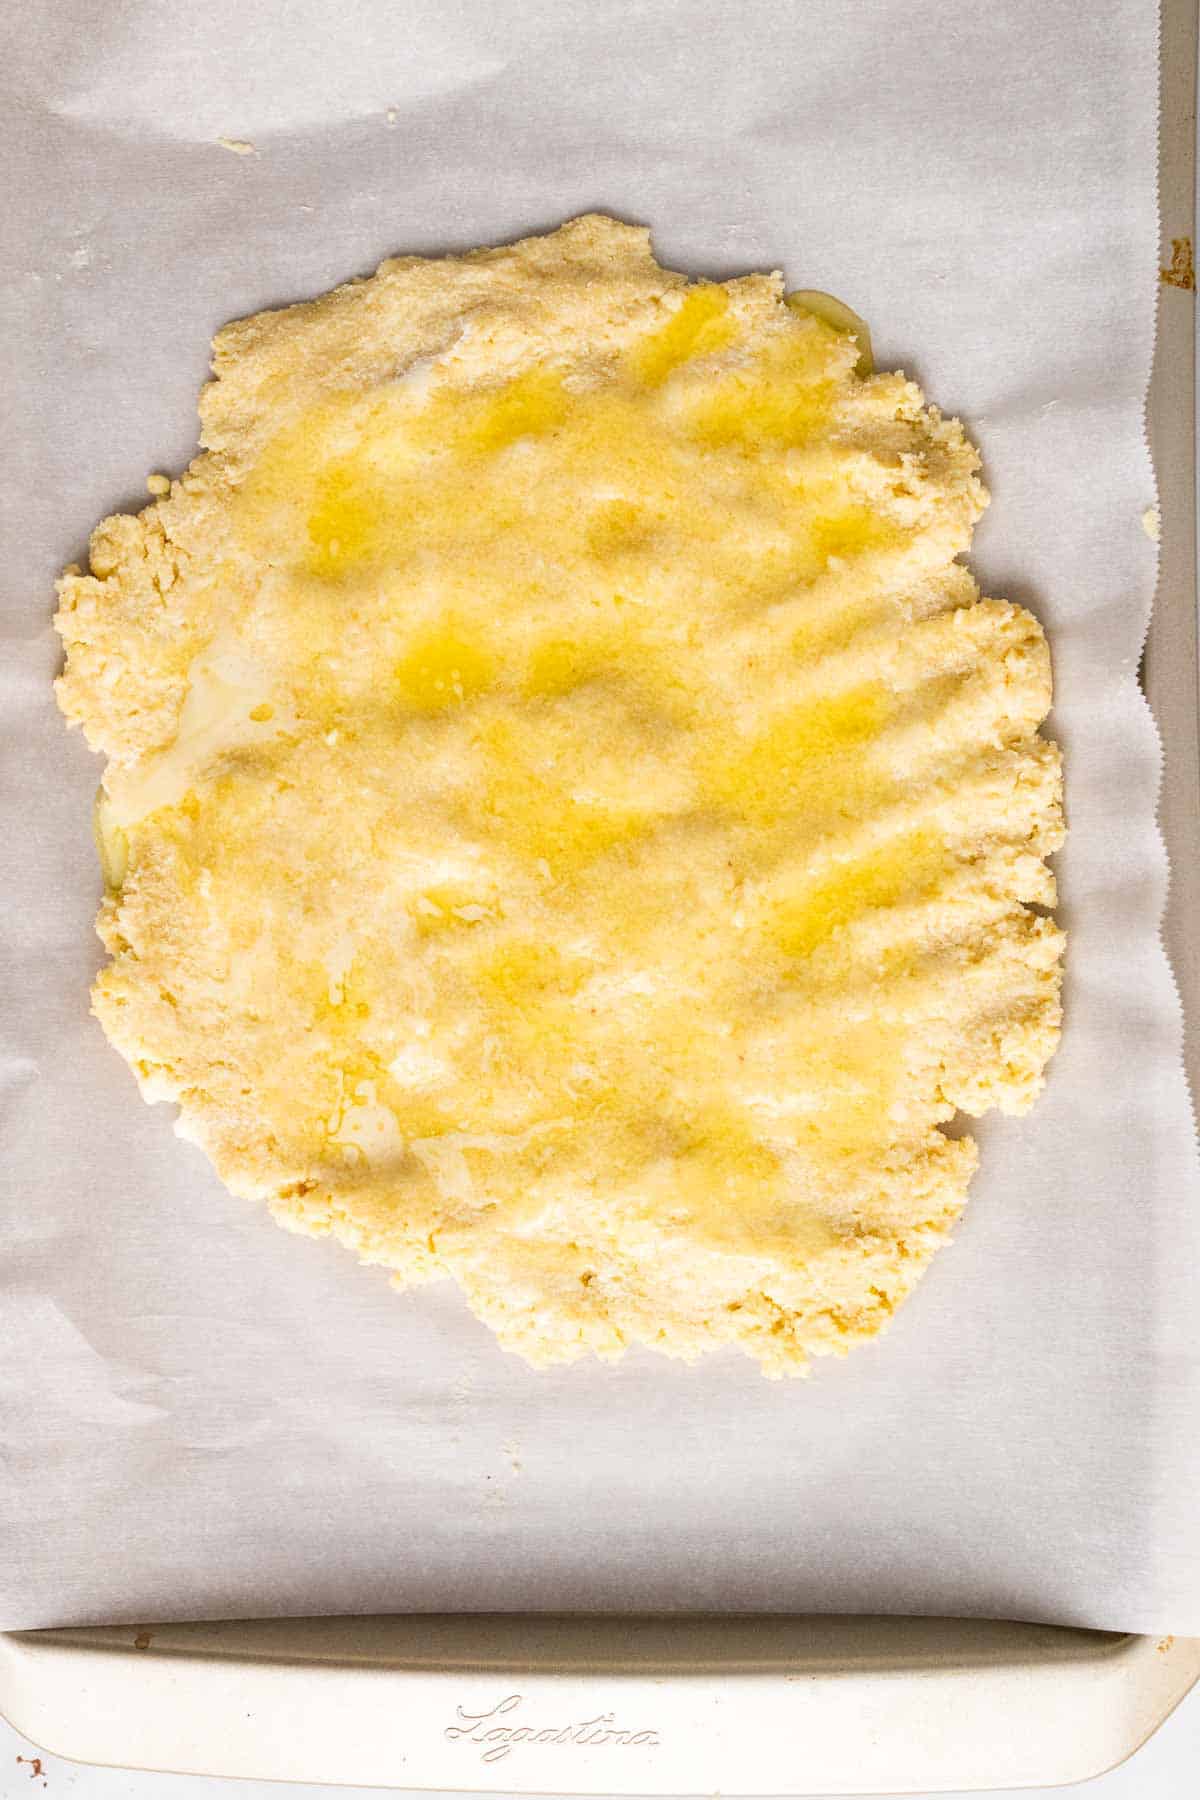 Melted butter spread over the dough on parchment paper, as seen from above